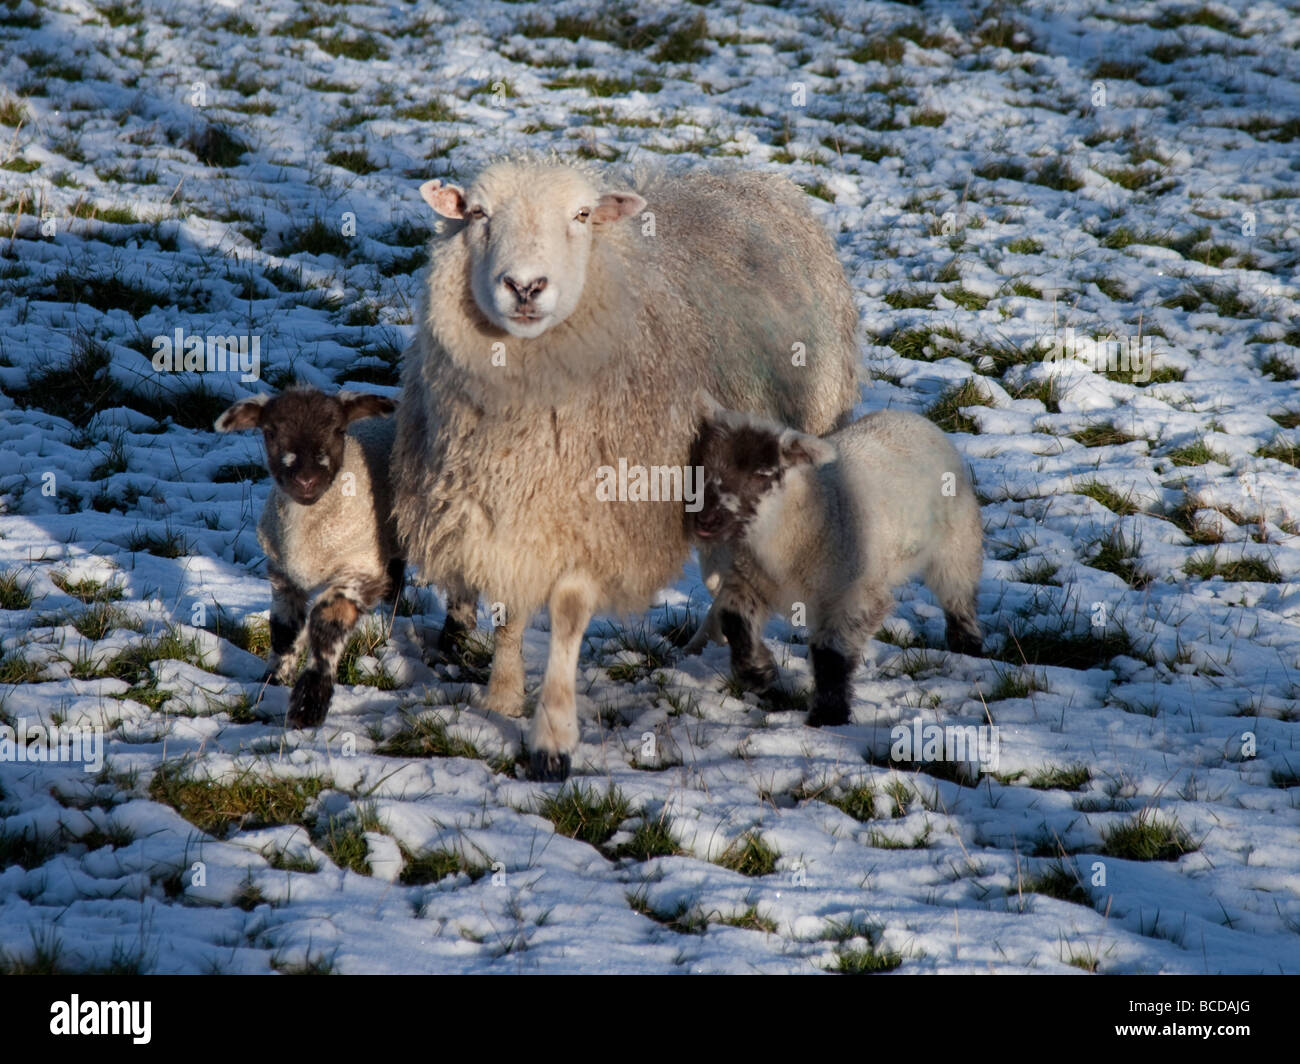 Sheep with baby lambs on cold snowy morning in winter Stock Photo